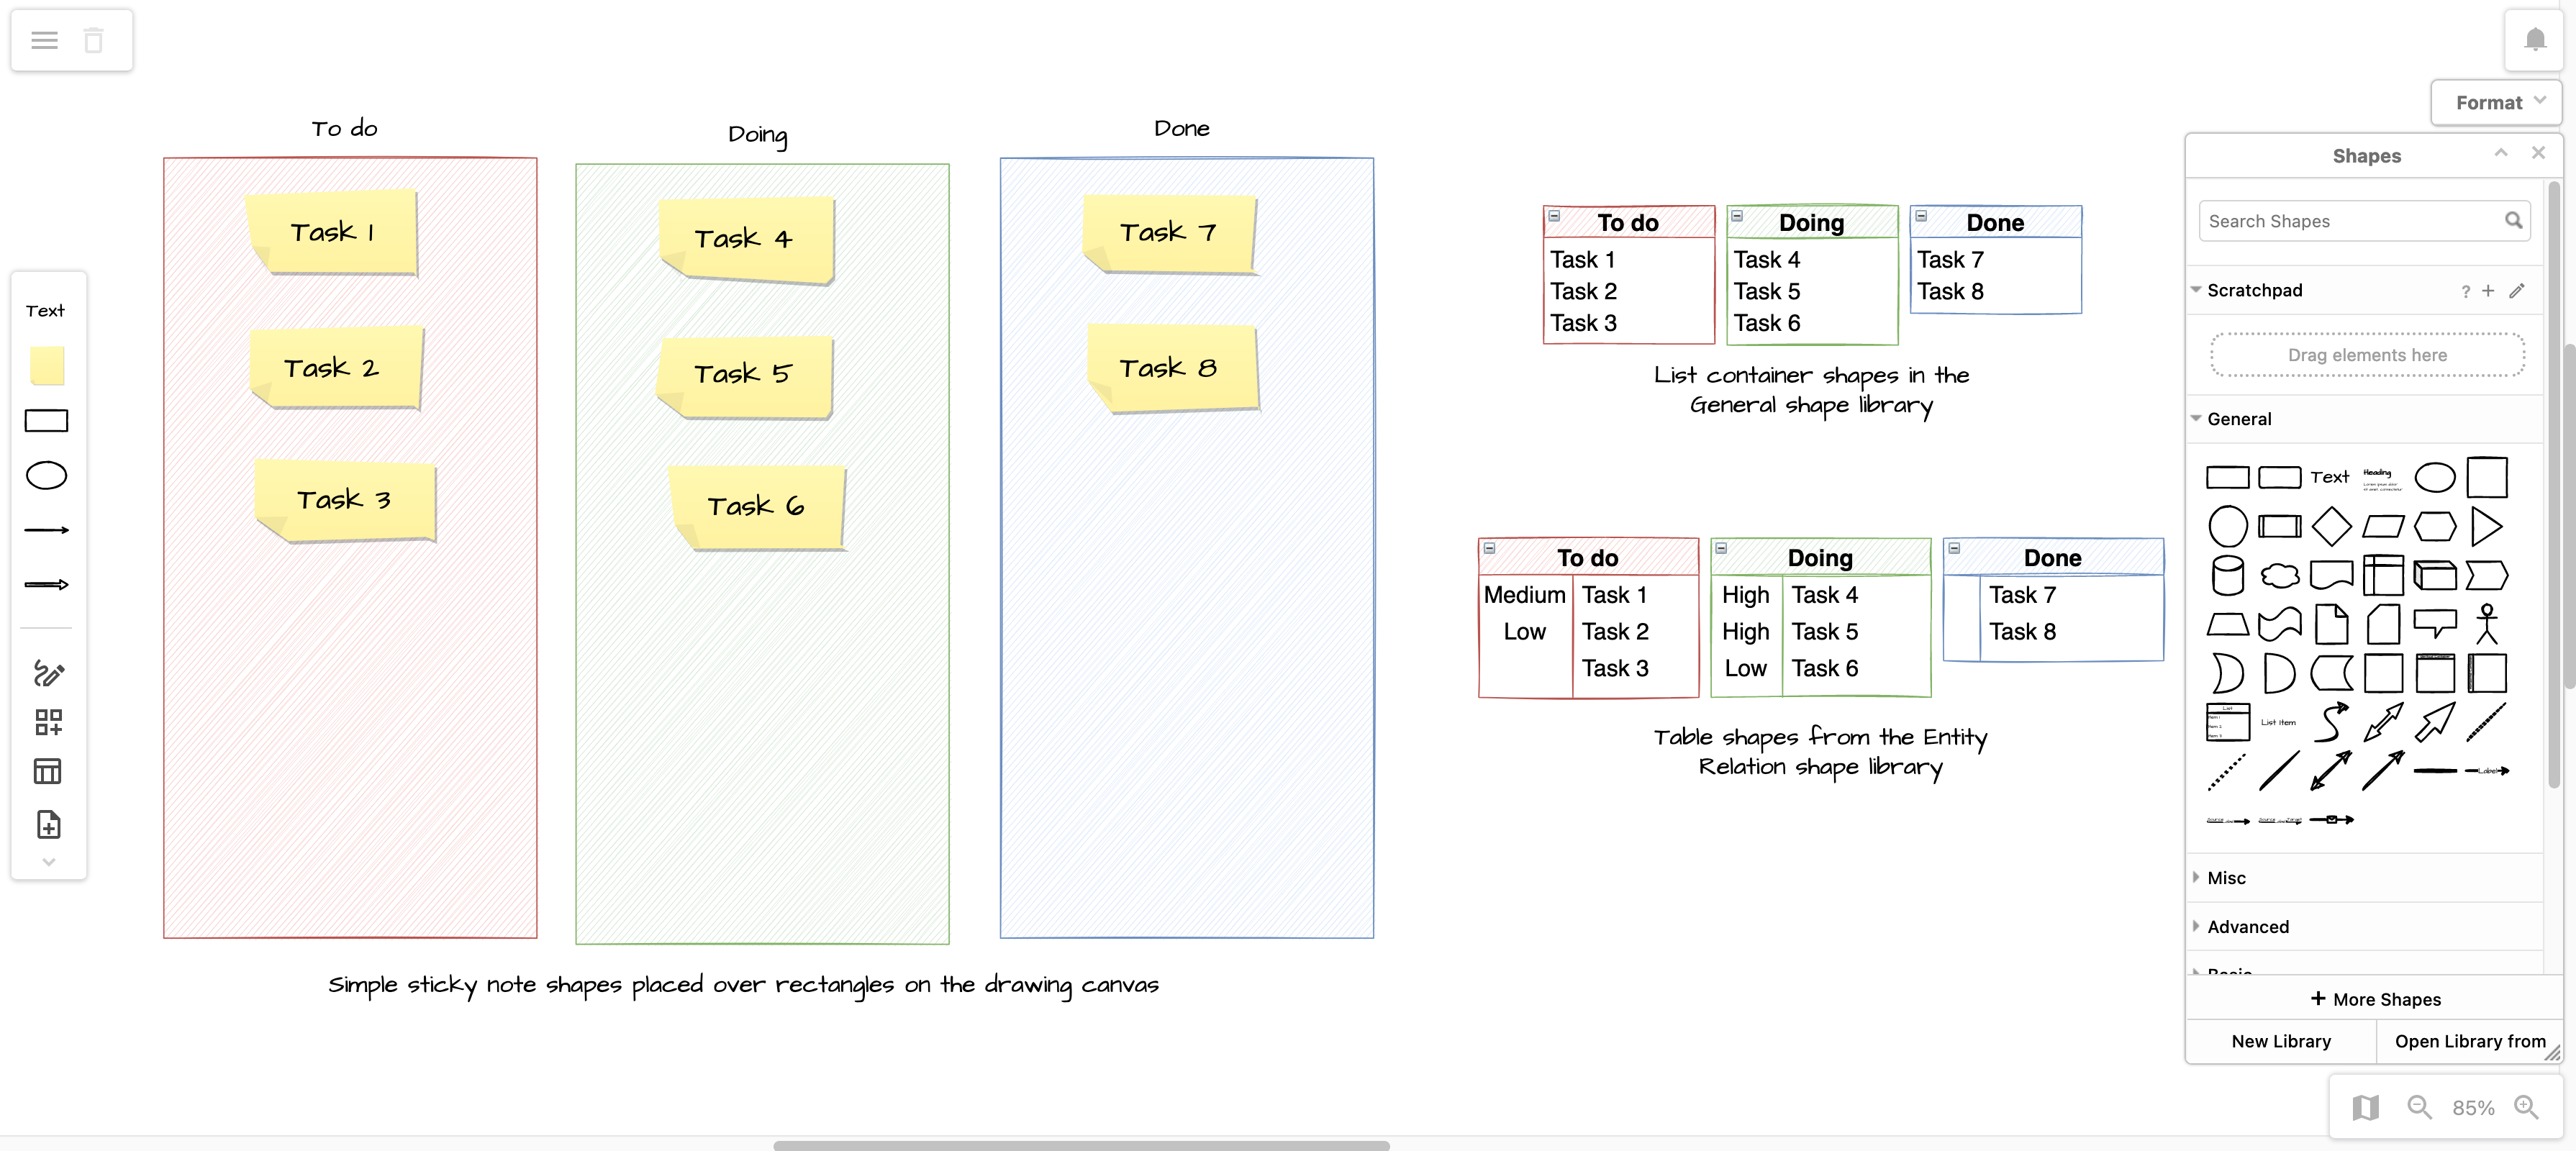 Create your kanban board in diagrams.net using simple shapes, lists, entity tables or the simple kanban template